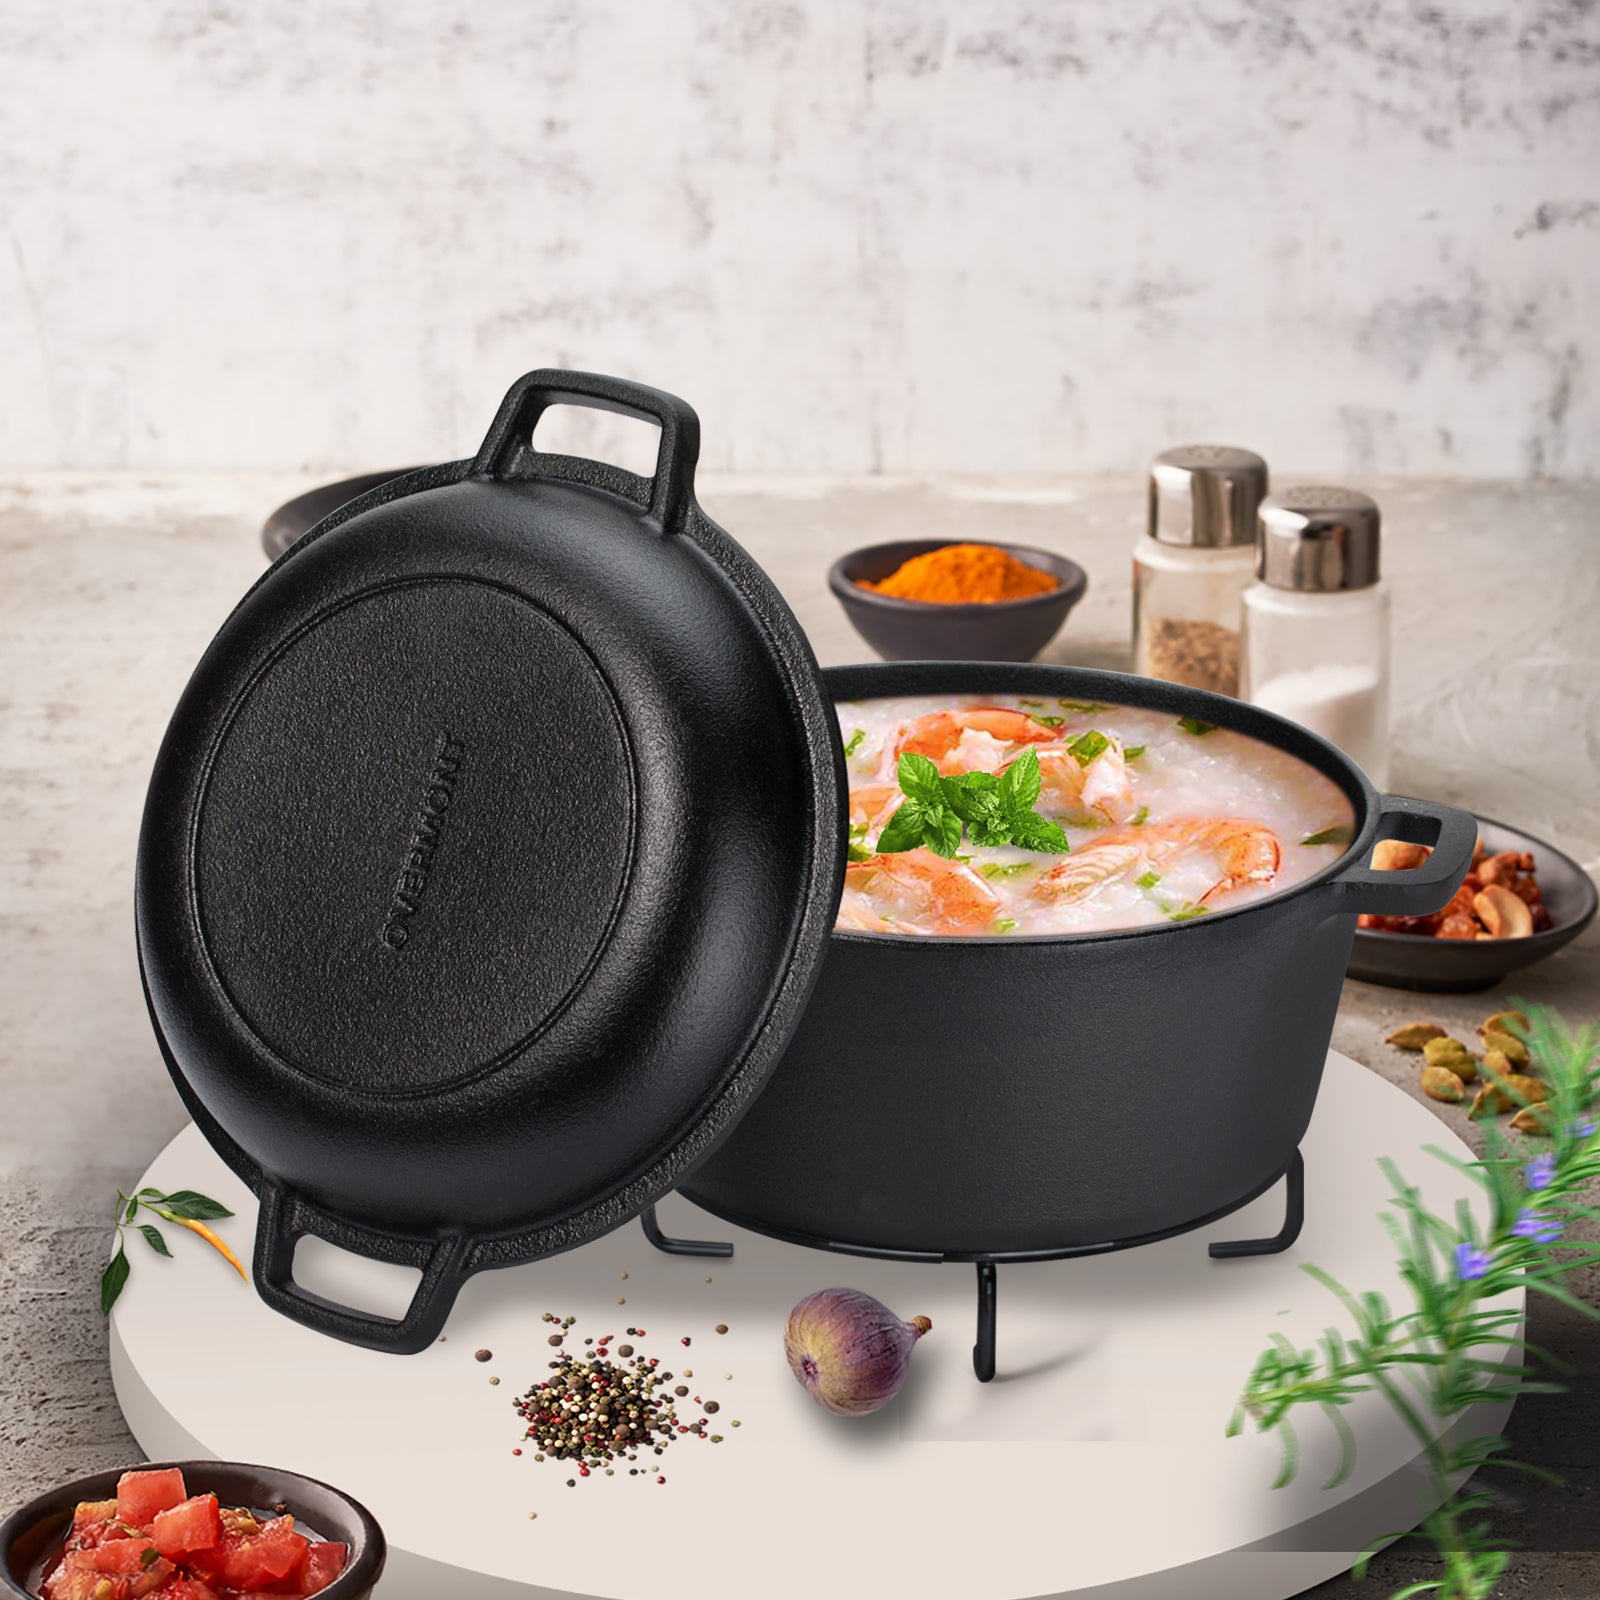 2 in 1 dutch oven cooking